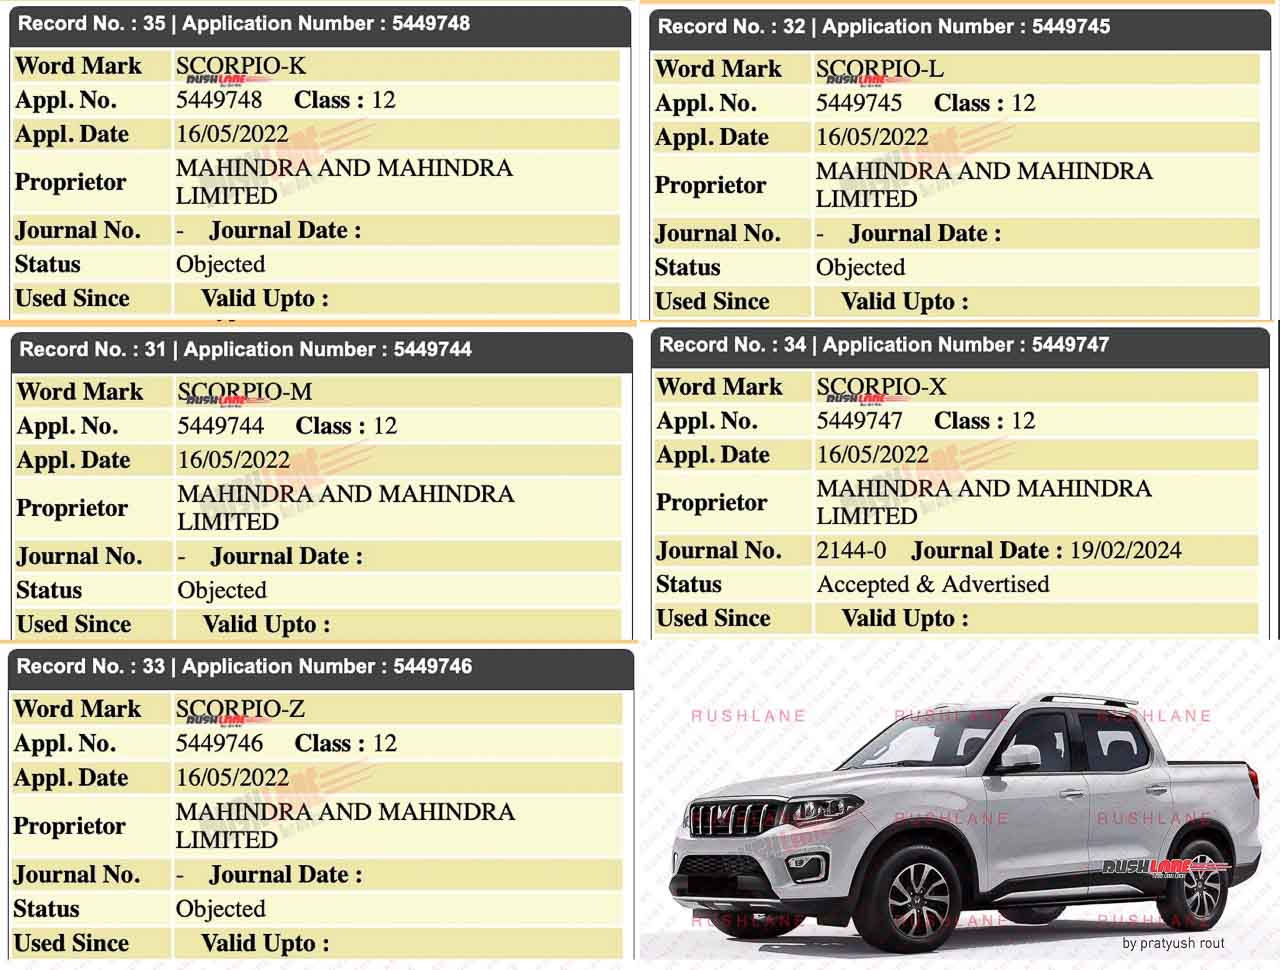 Mahindra Scorpio Pickup Trademarks Filed - Scorpio X Accepted, Others Objected